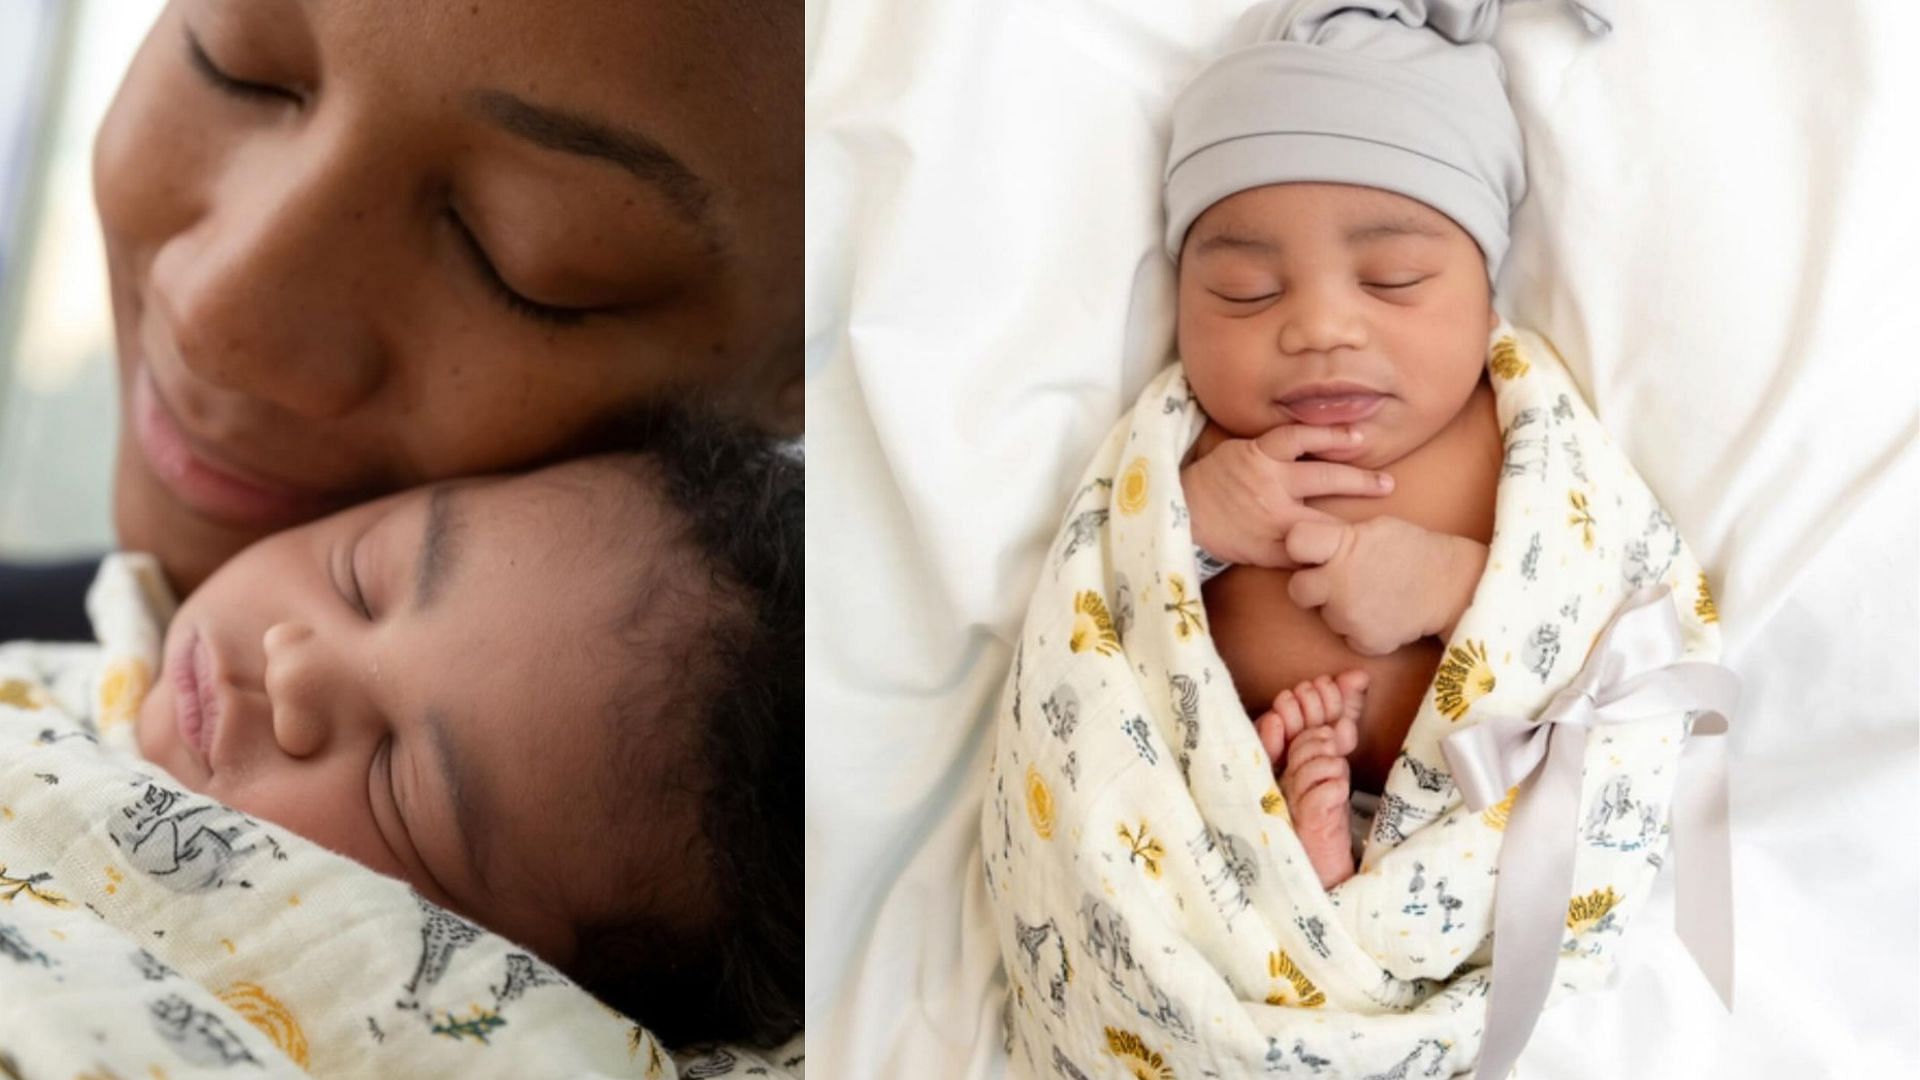 IN PHOTOS: Maria Taylor welcomes baby boy Roman in adorable pictures